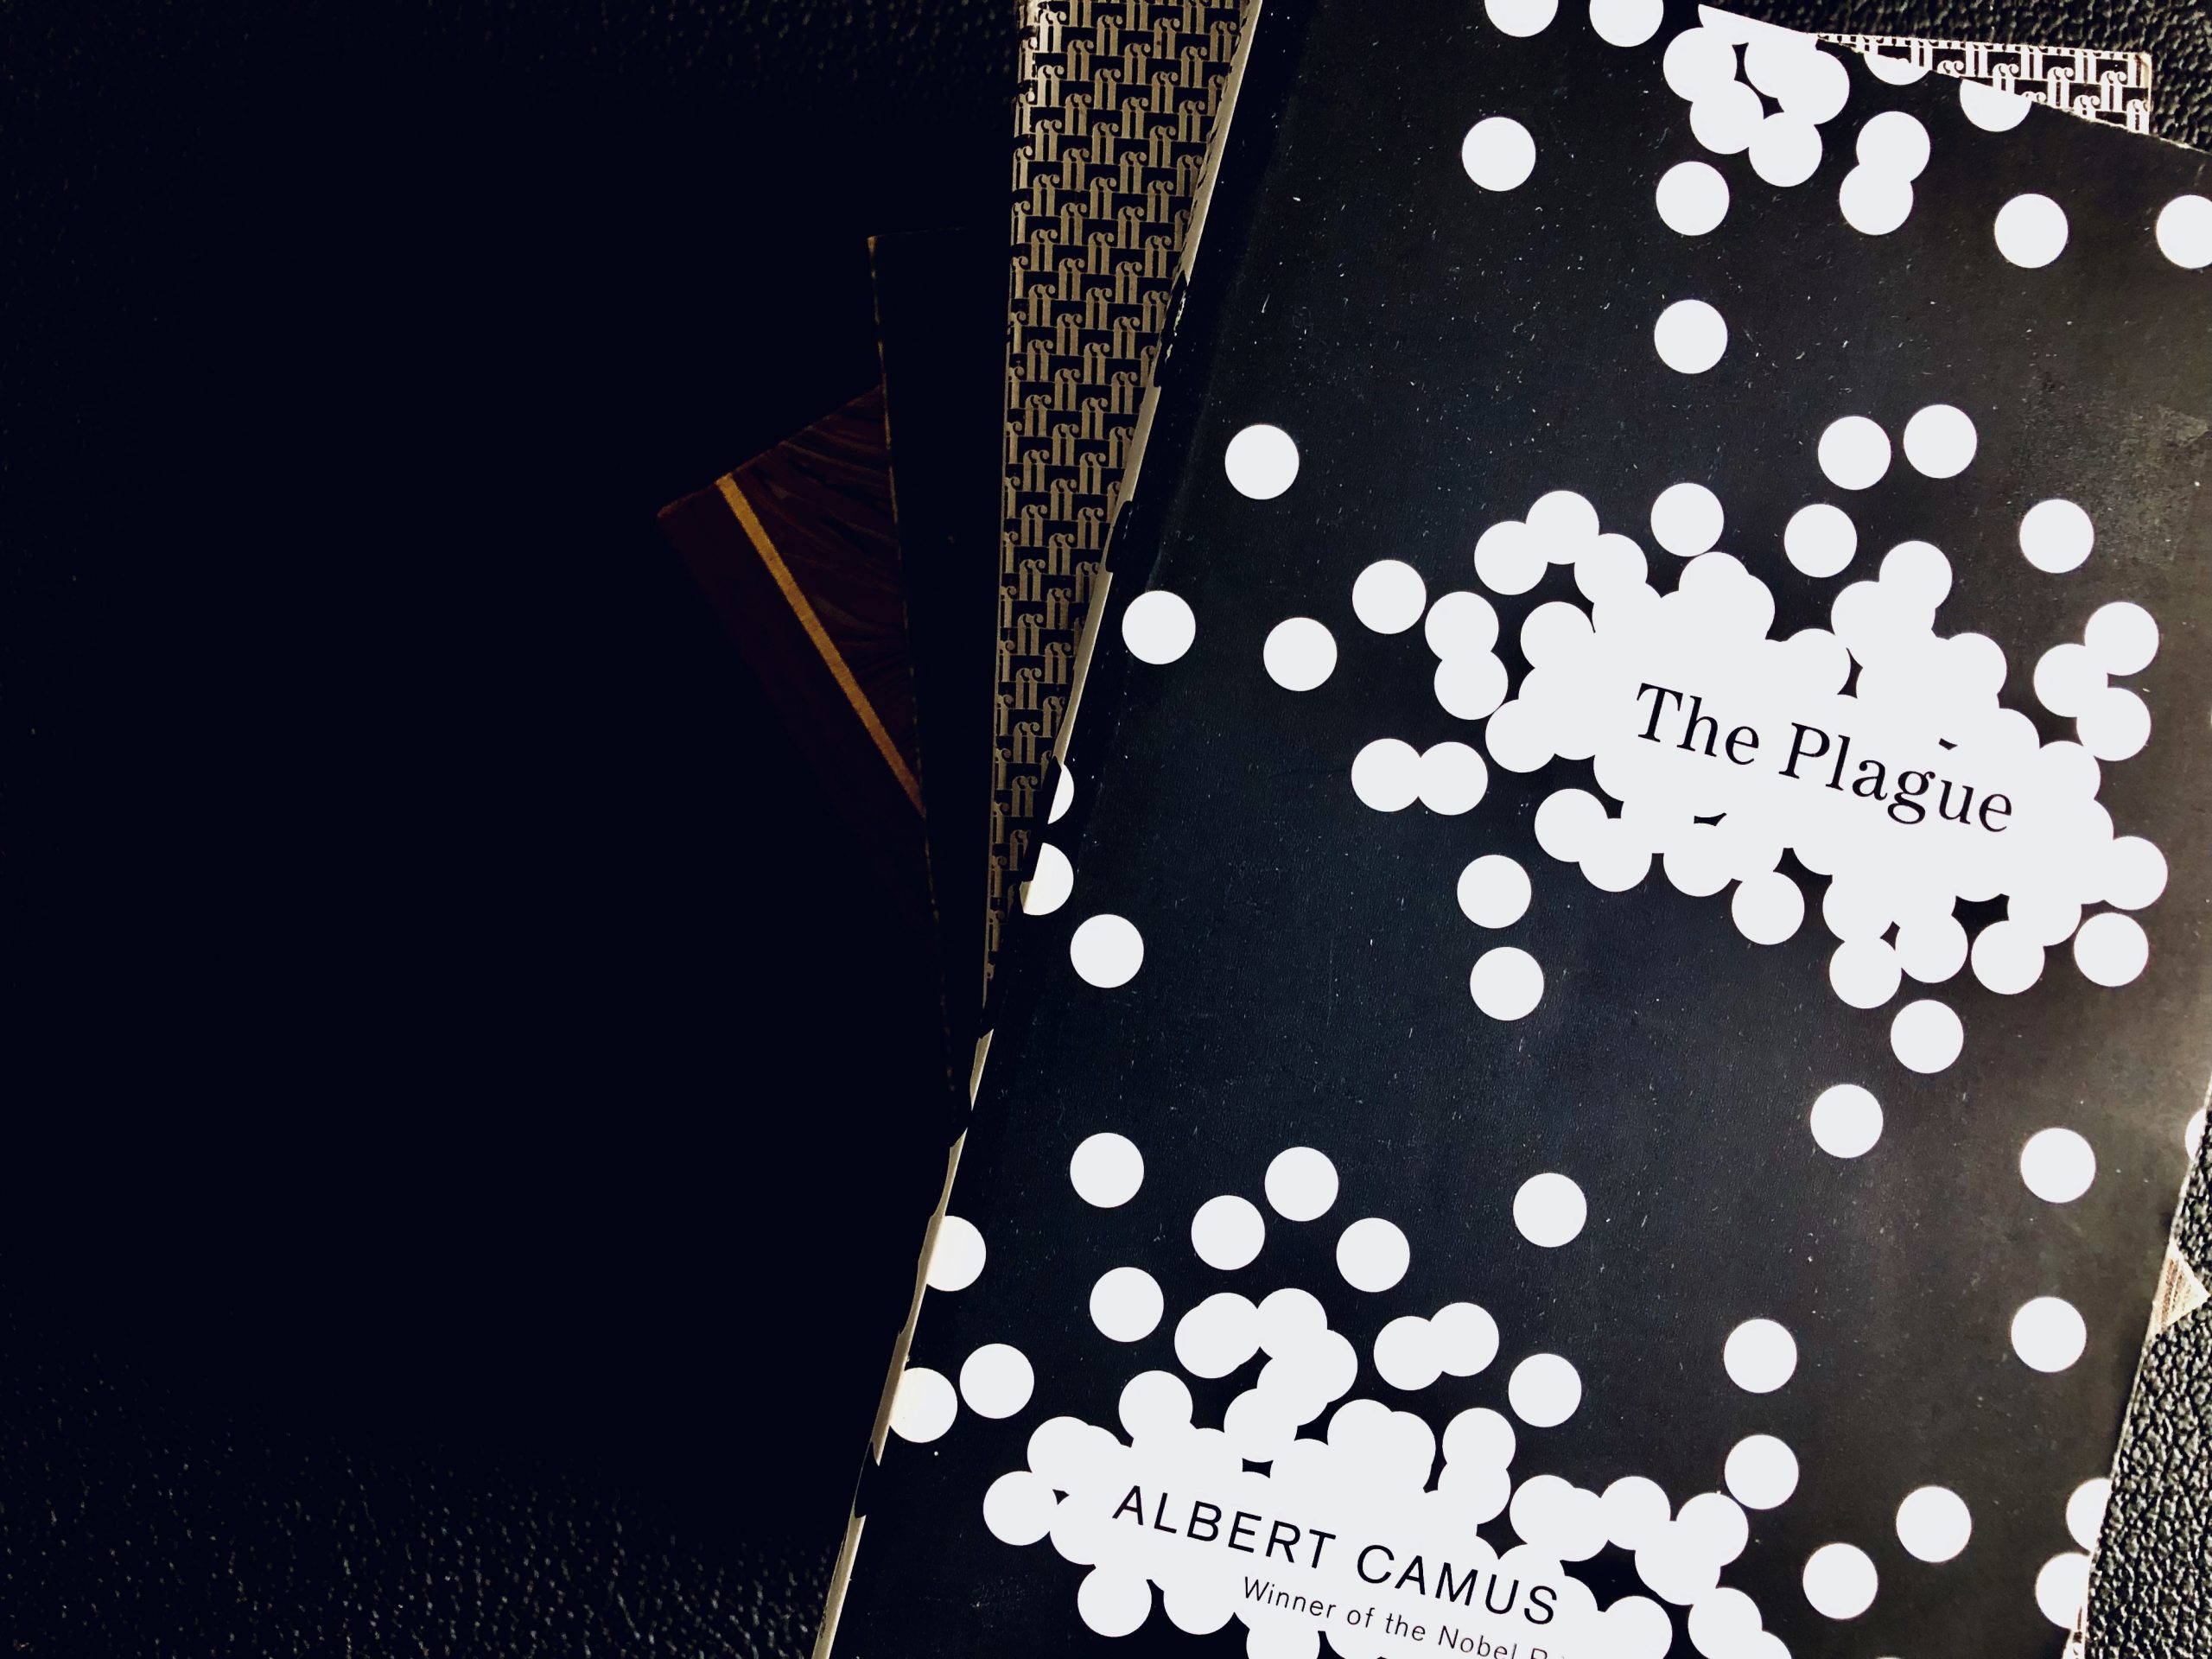 Black and white cover of the Plague by Albert Camus